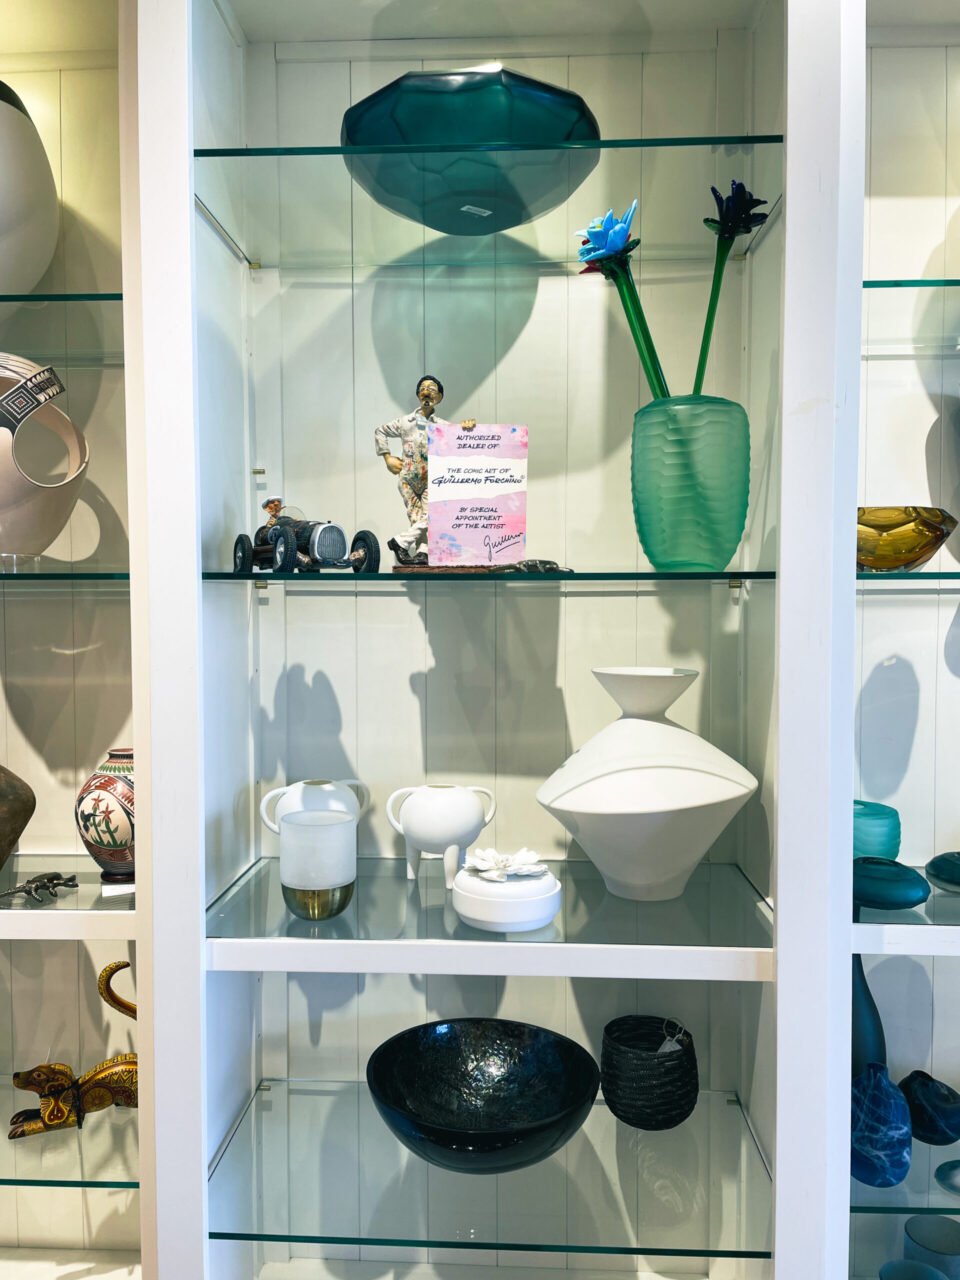 A display case with many different vases and bowls.